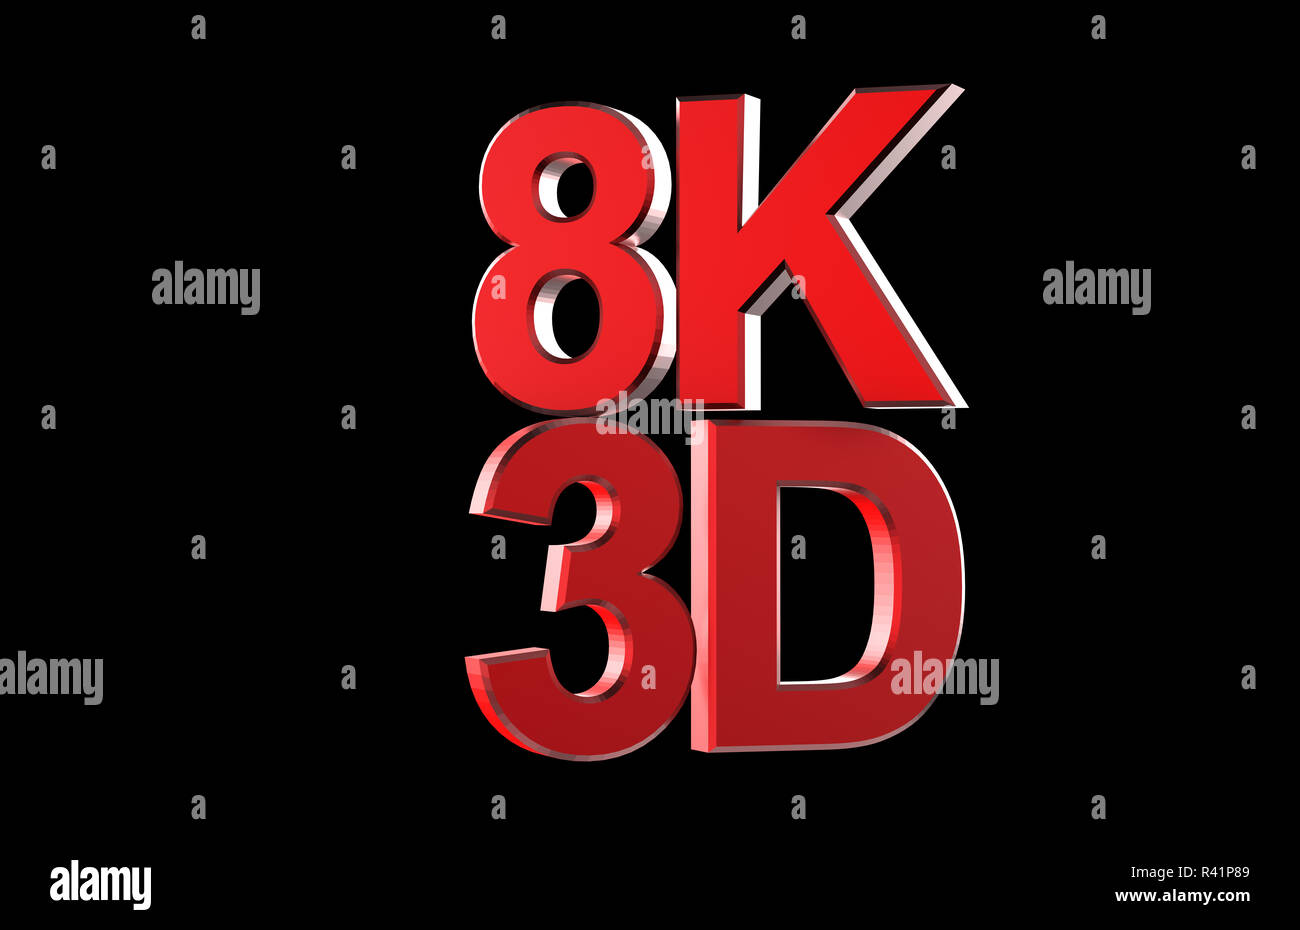 Full ultra HD 8k 3D logo isolated with black Stock Photo